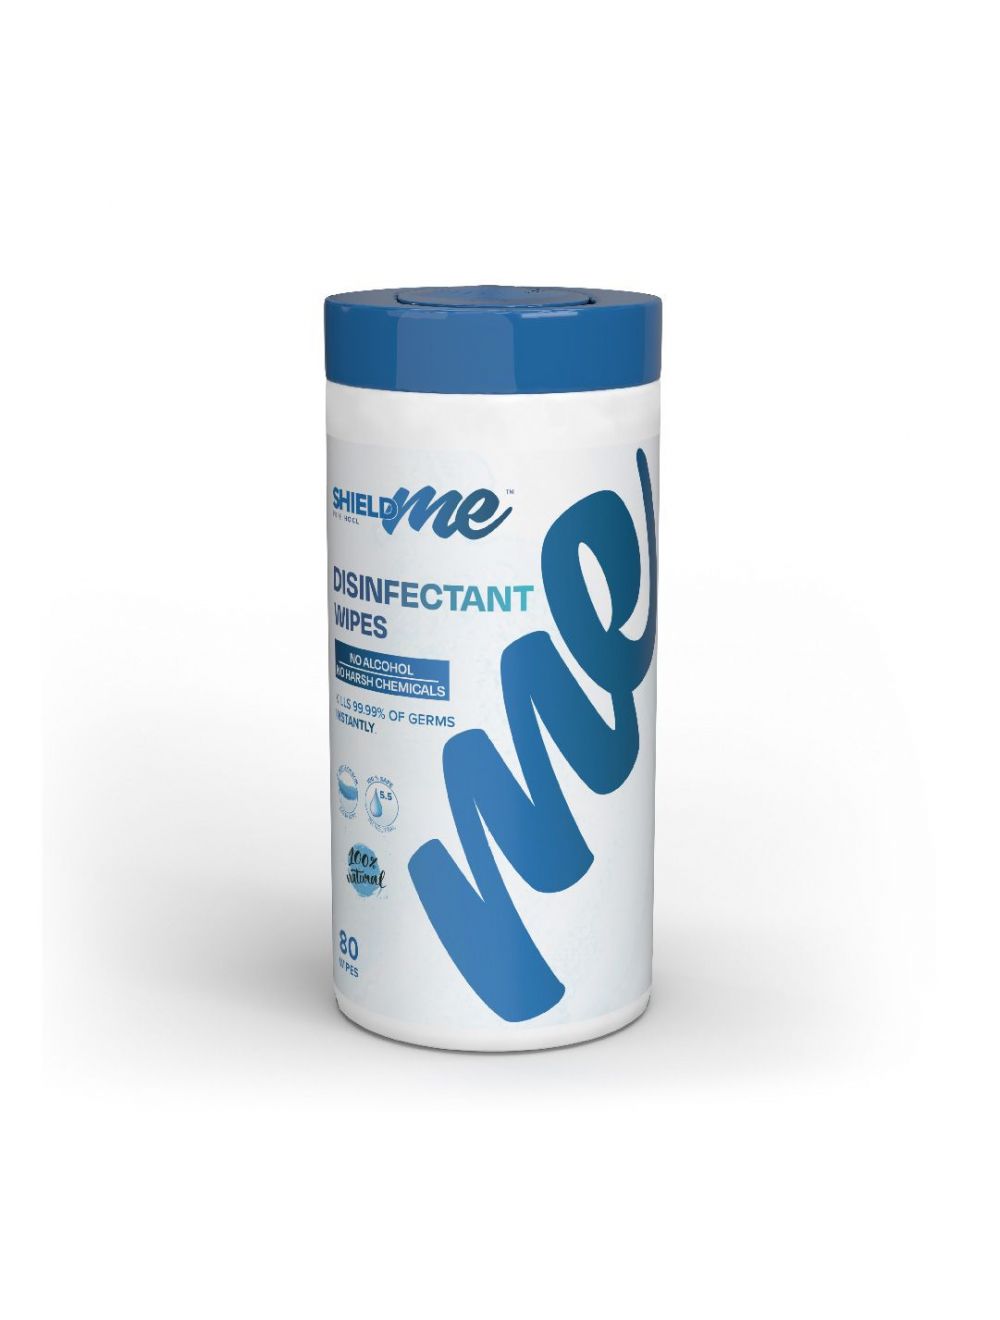 SHIELDme Disinfecting Wipes, 100% Natural - 80 Wipes - Cannister-XG-3DTX-XYPT